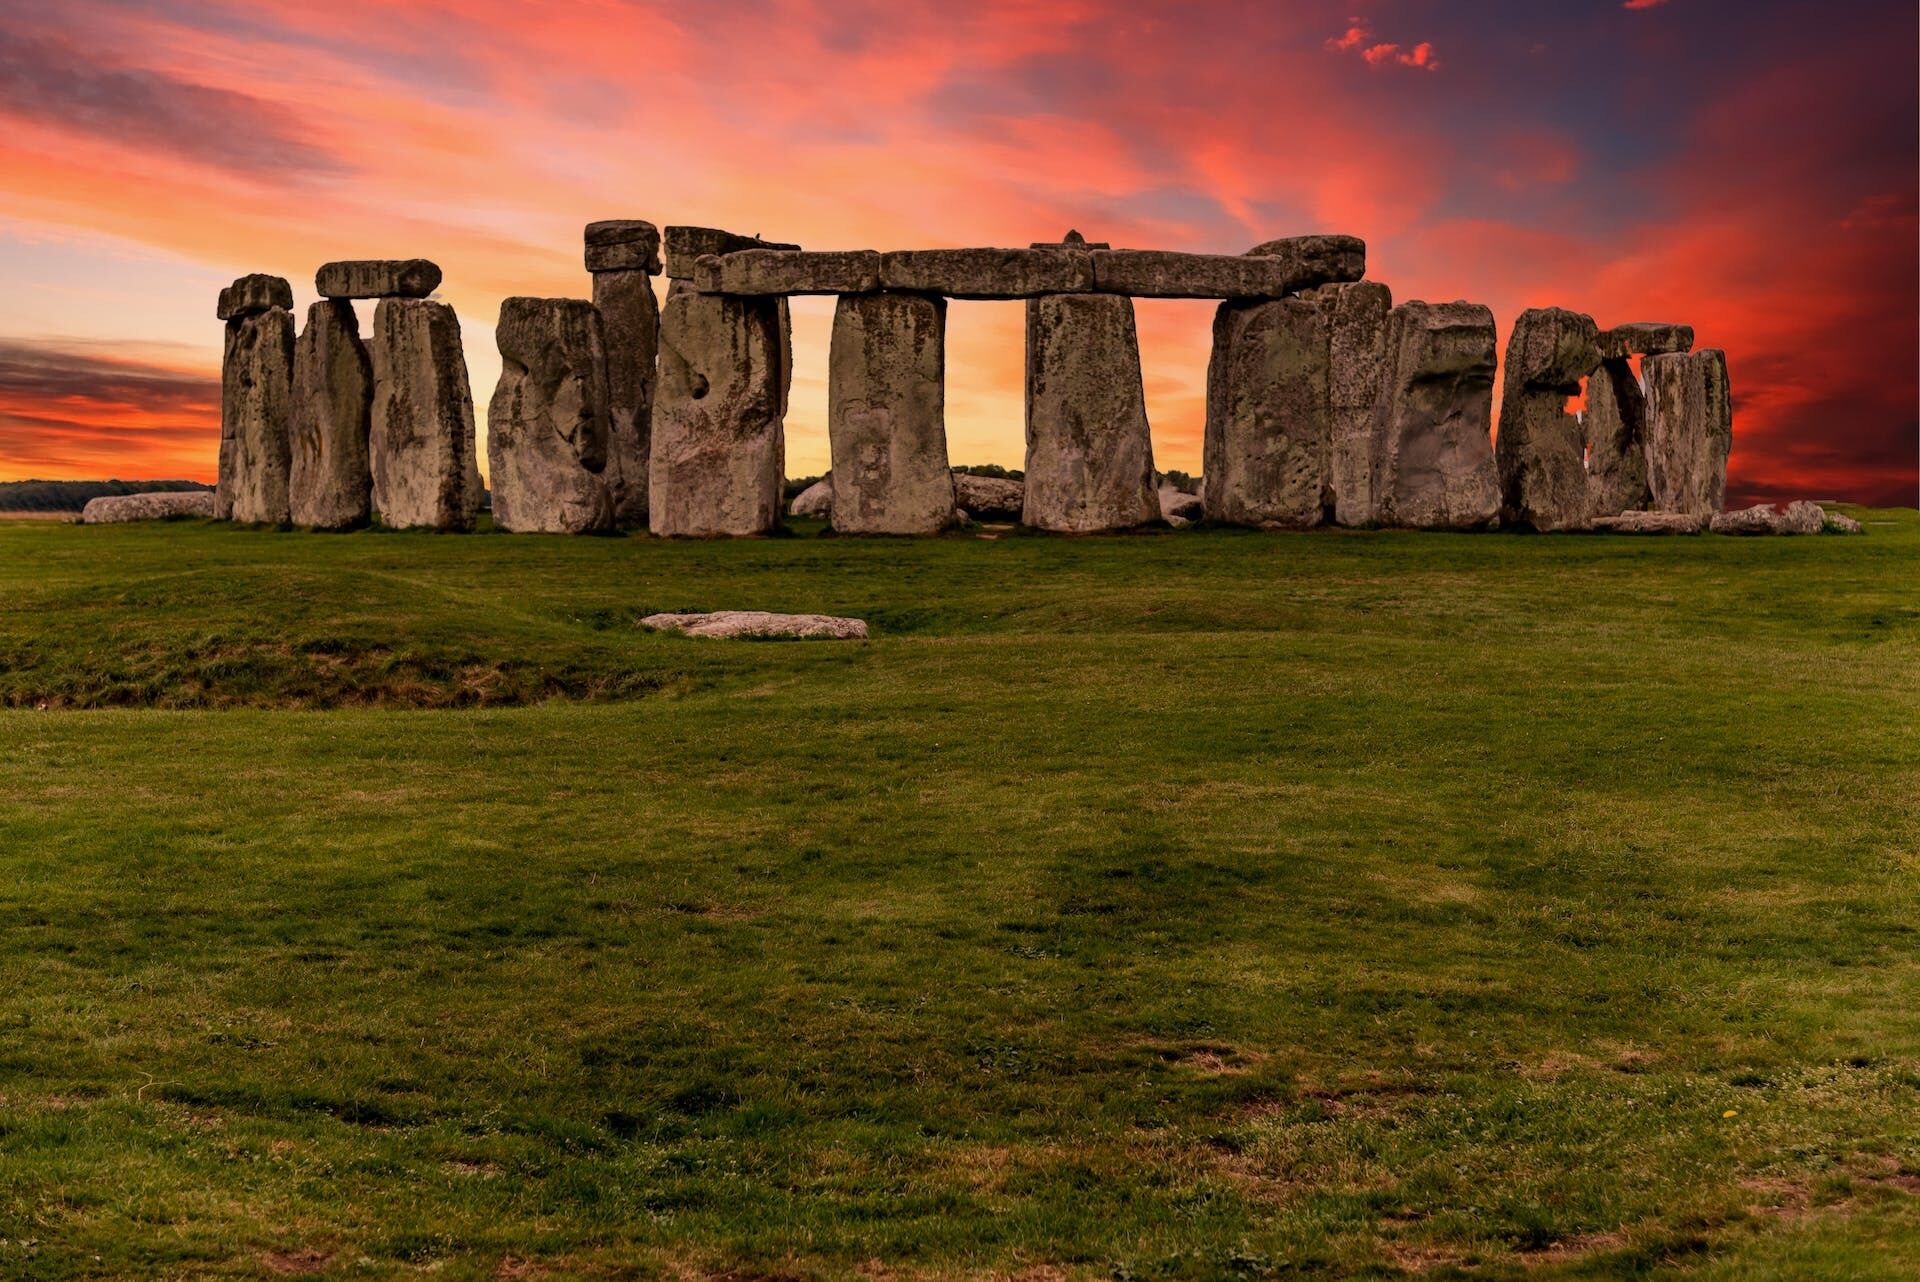 One of the questions about Stonehenge has been answered